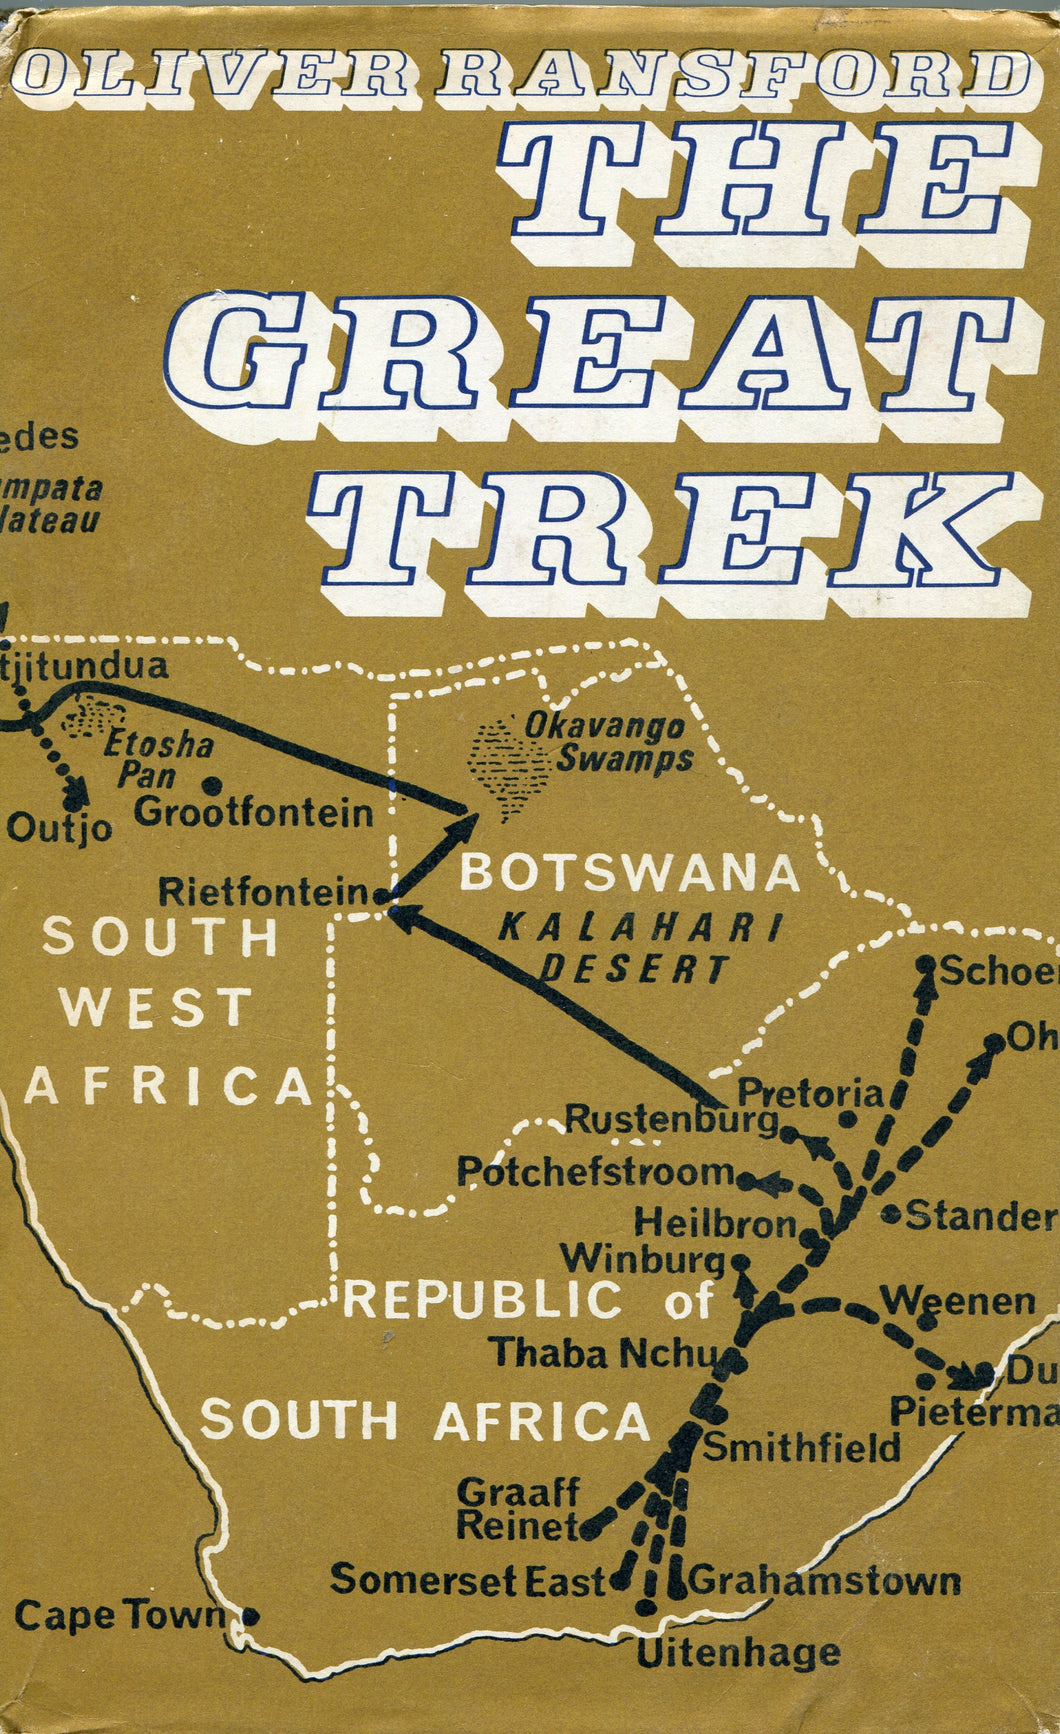 THE GREAT TREK by Oliver Ransford